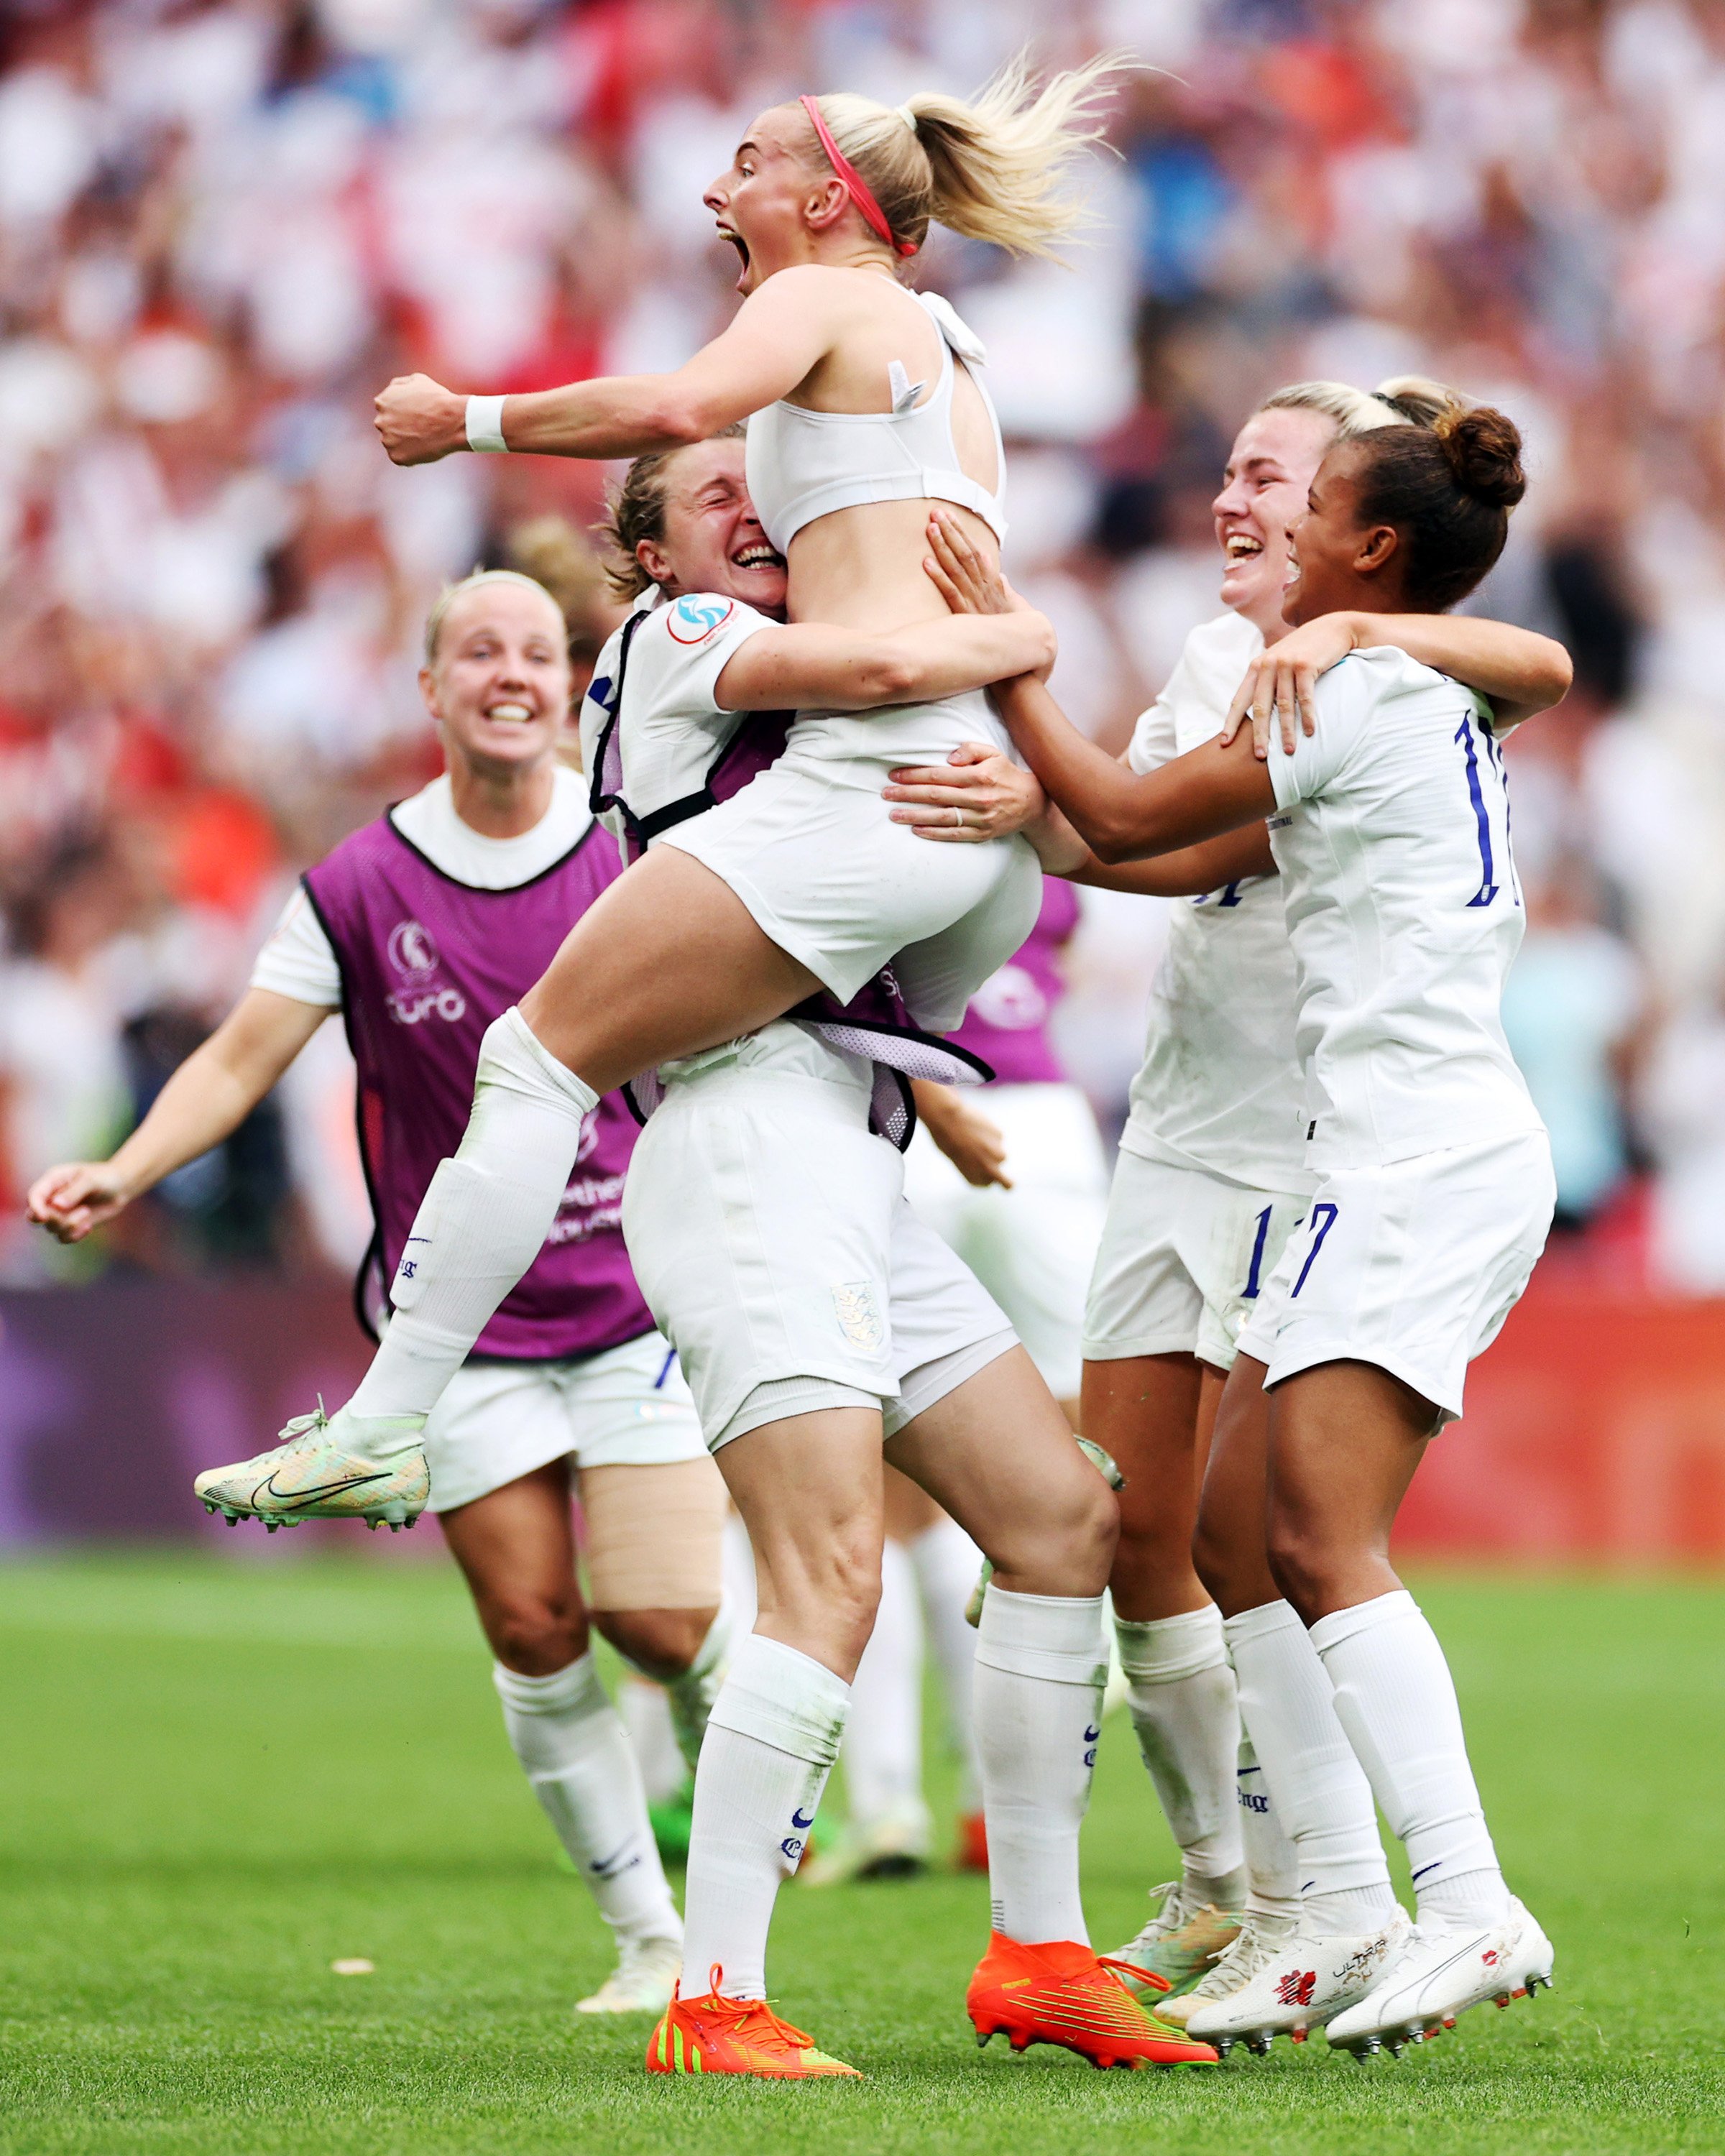  England players react with Chloe Kelly #18 after their goal in extra time during the UEFA Women's Euro 2022 final match between England and Germany at Wembley Stadium on July 31, 2022 in London, England.  